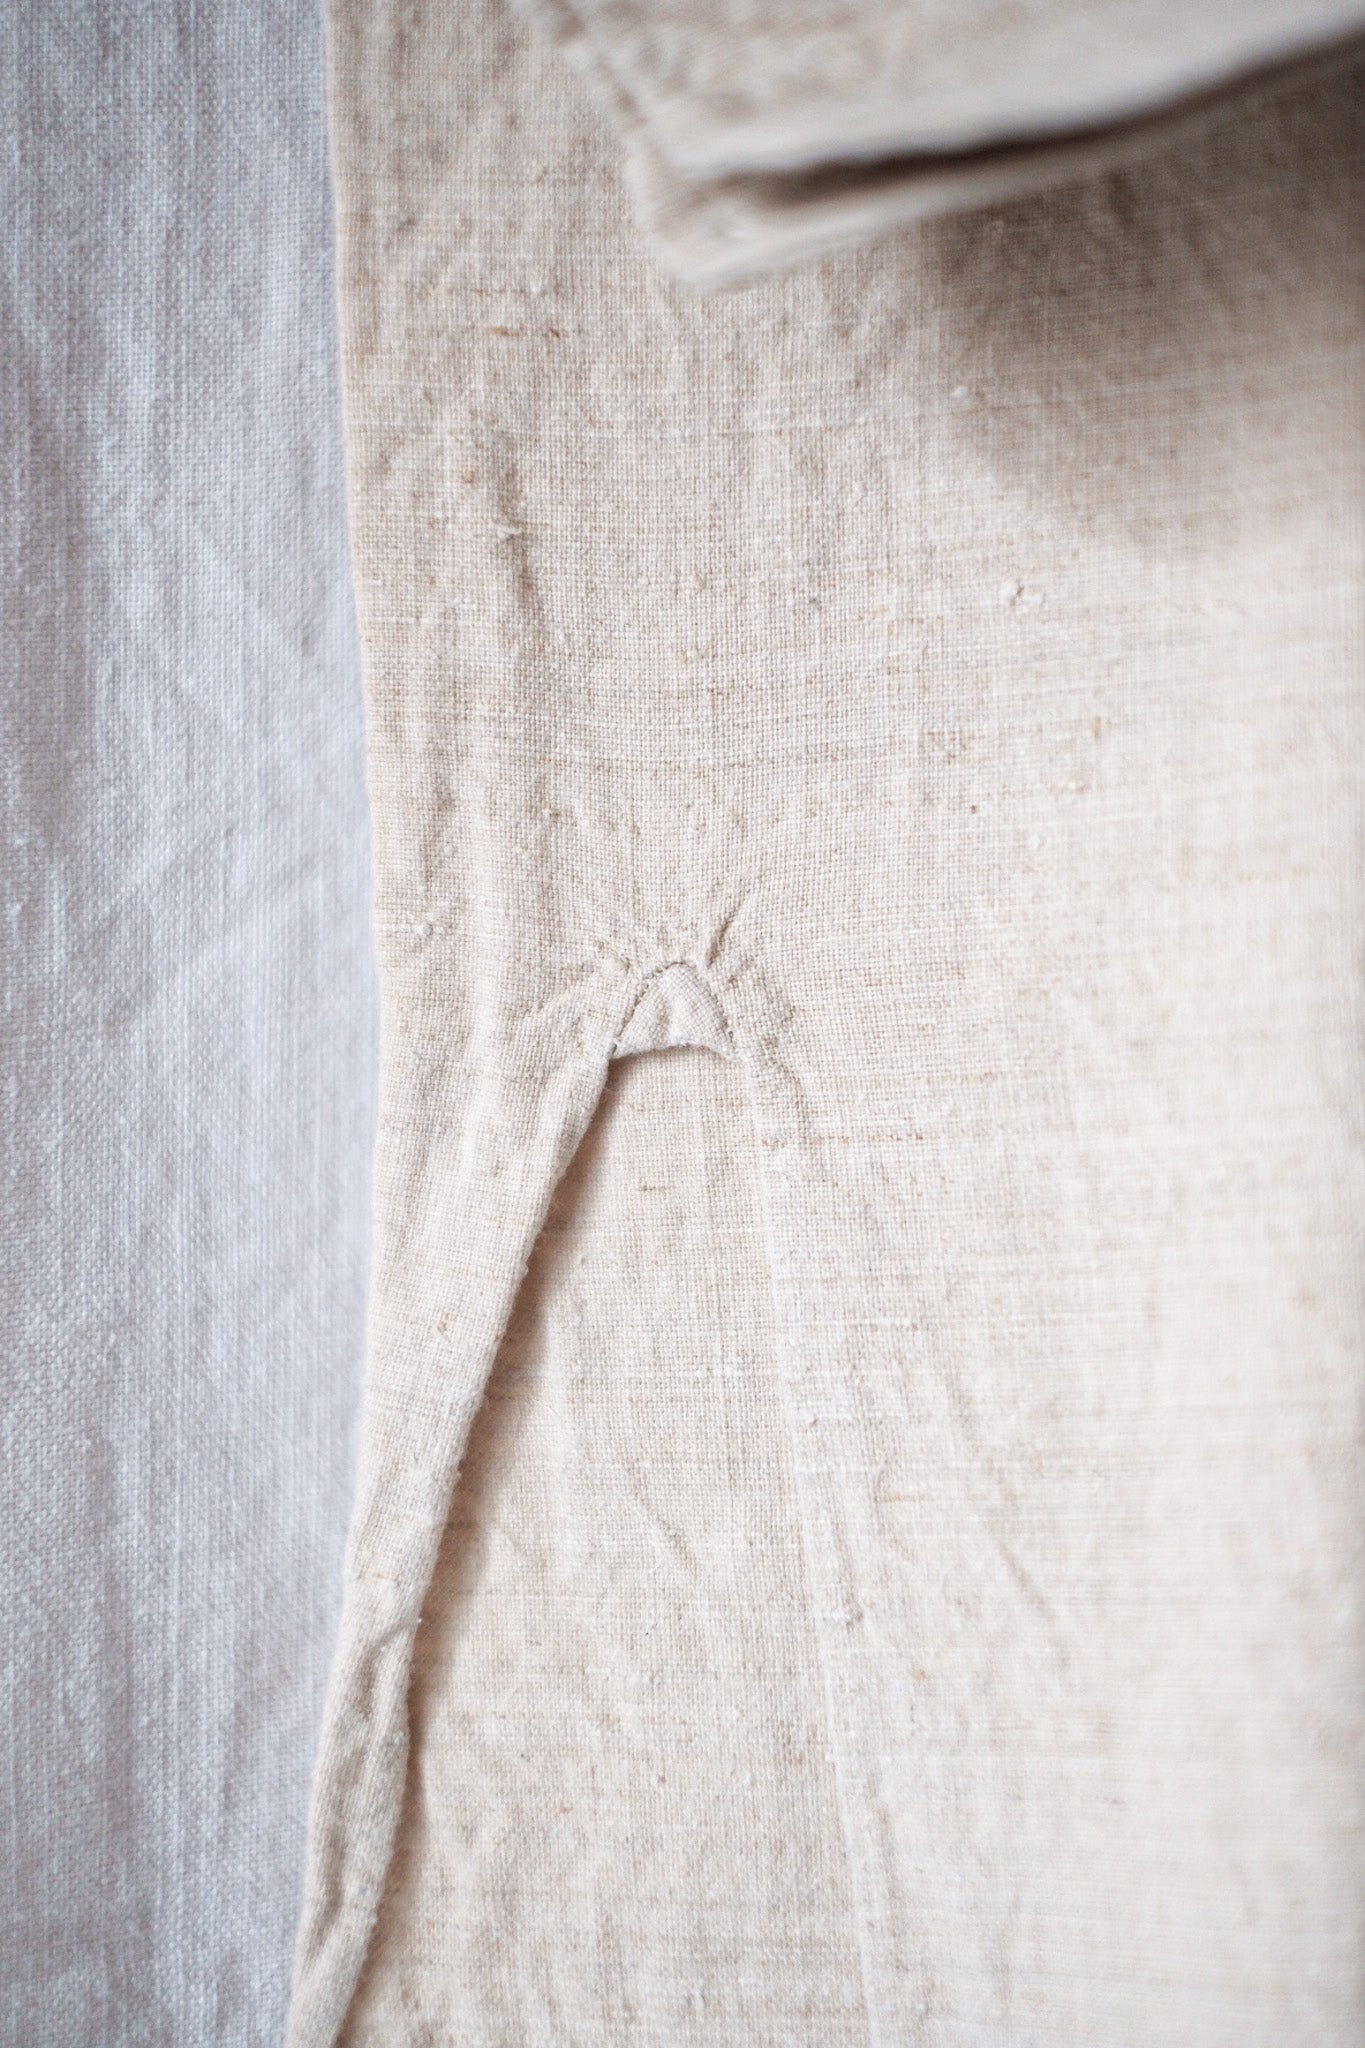 【Early 20th C】French Antique Linen Shirt